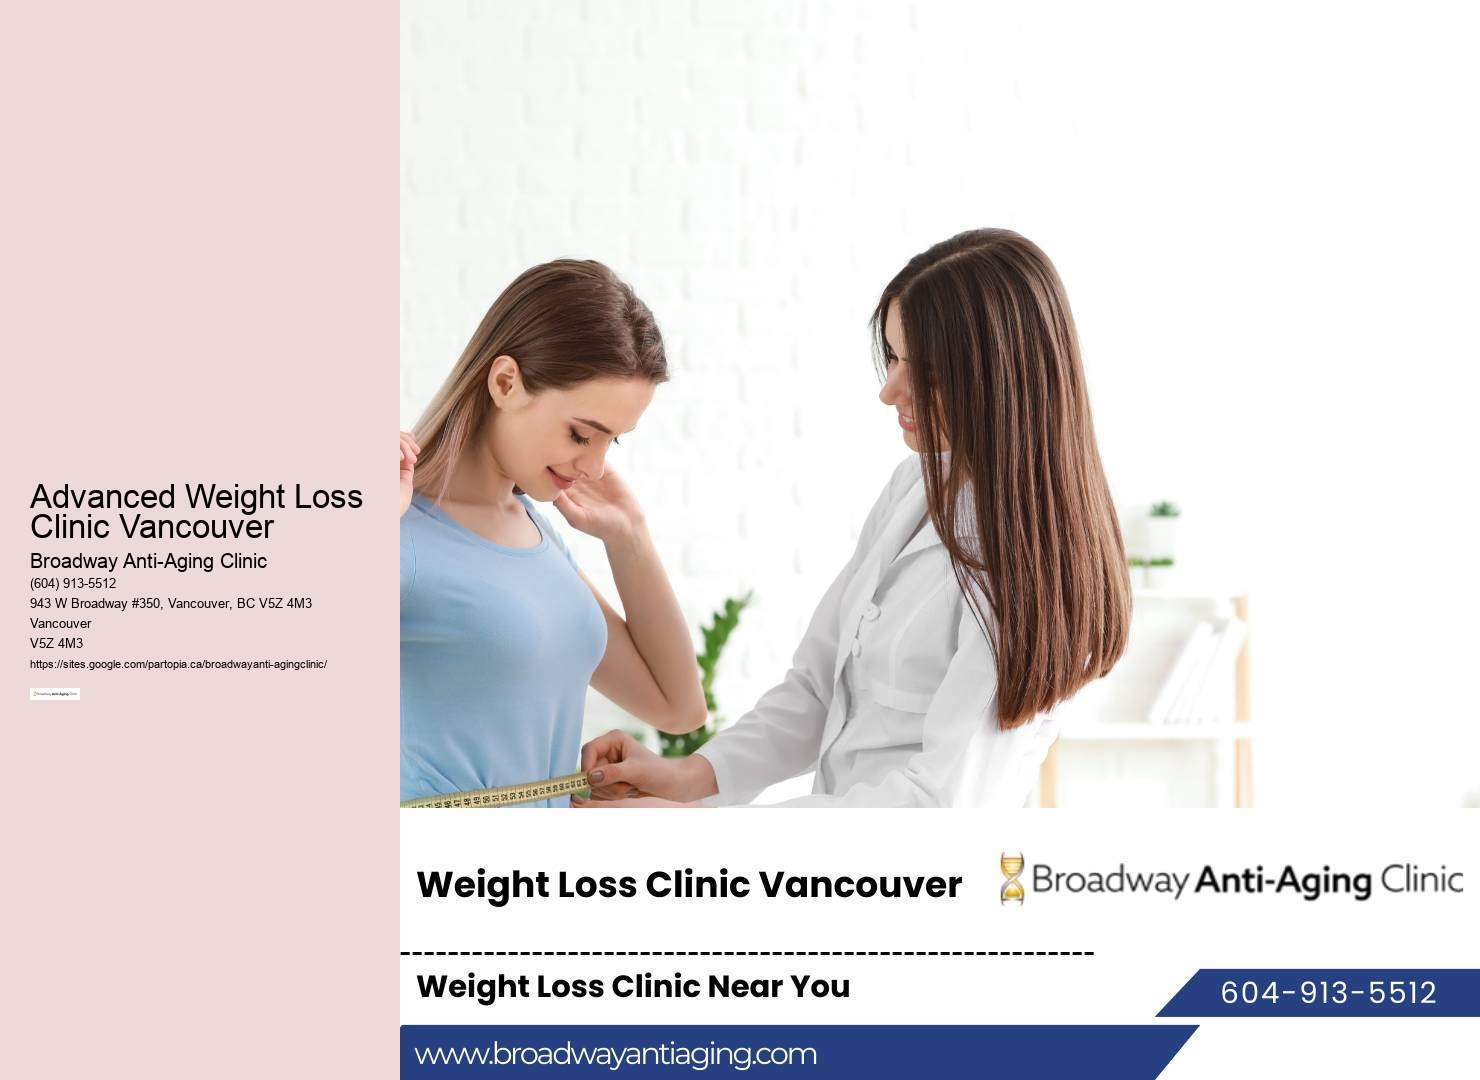 Advanced Weight Loss Clinic Vancouver